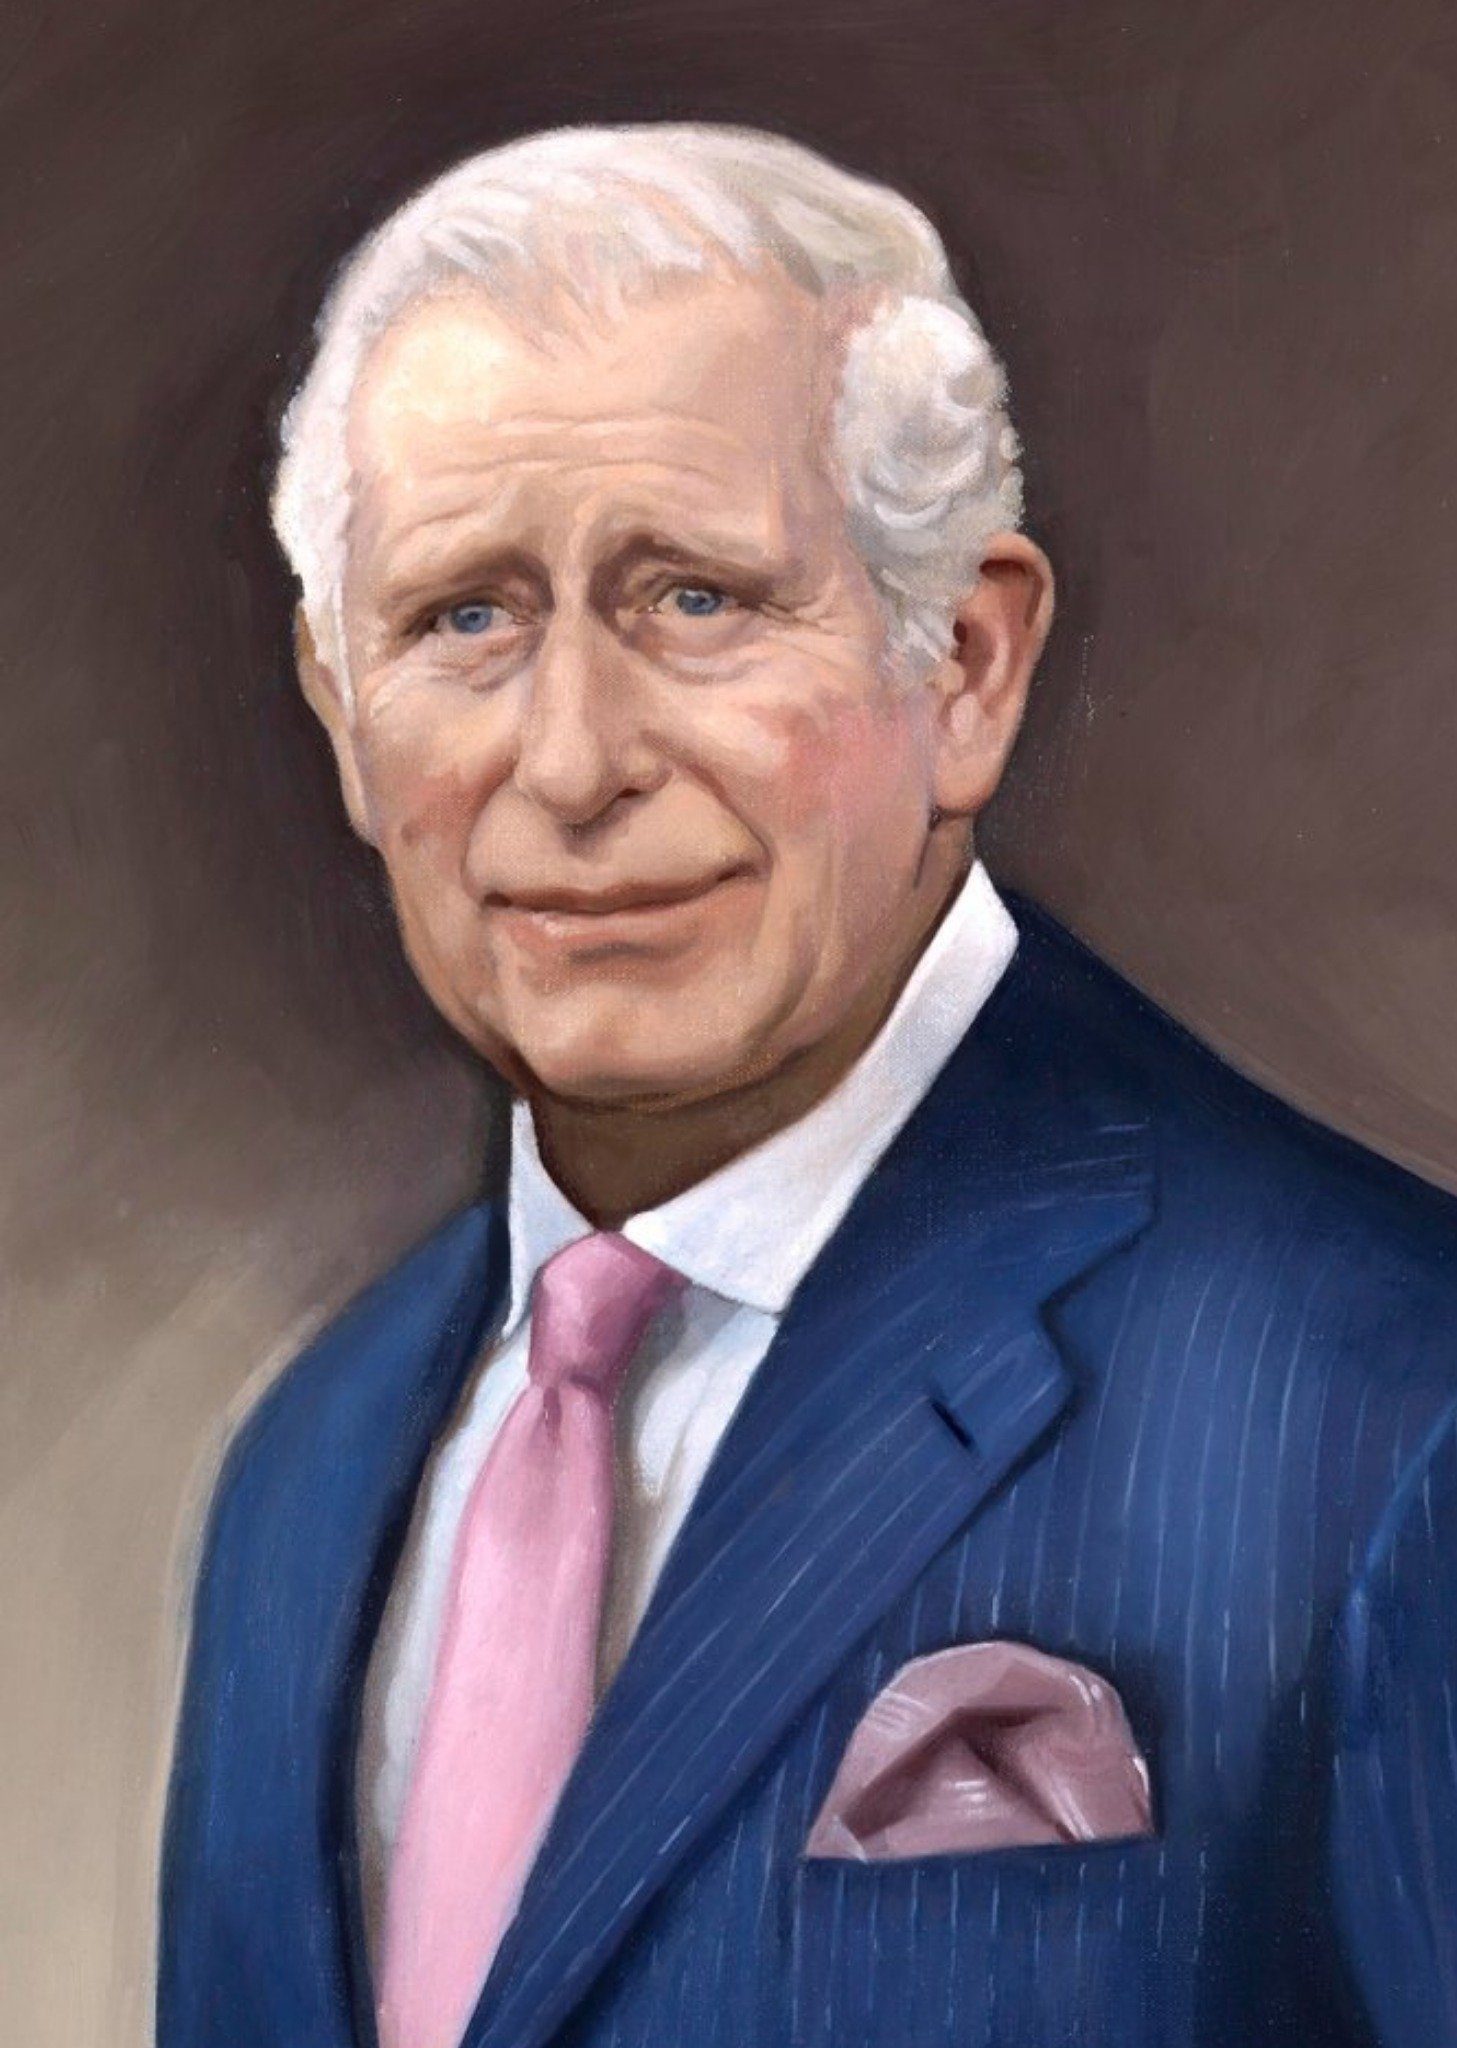 Moonpig King Charles Iii Traditional Portrait Coronation Card By Mary Evans Picture Library, Large